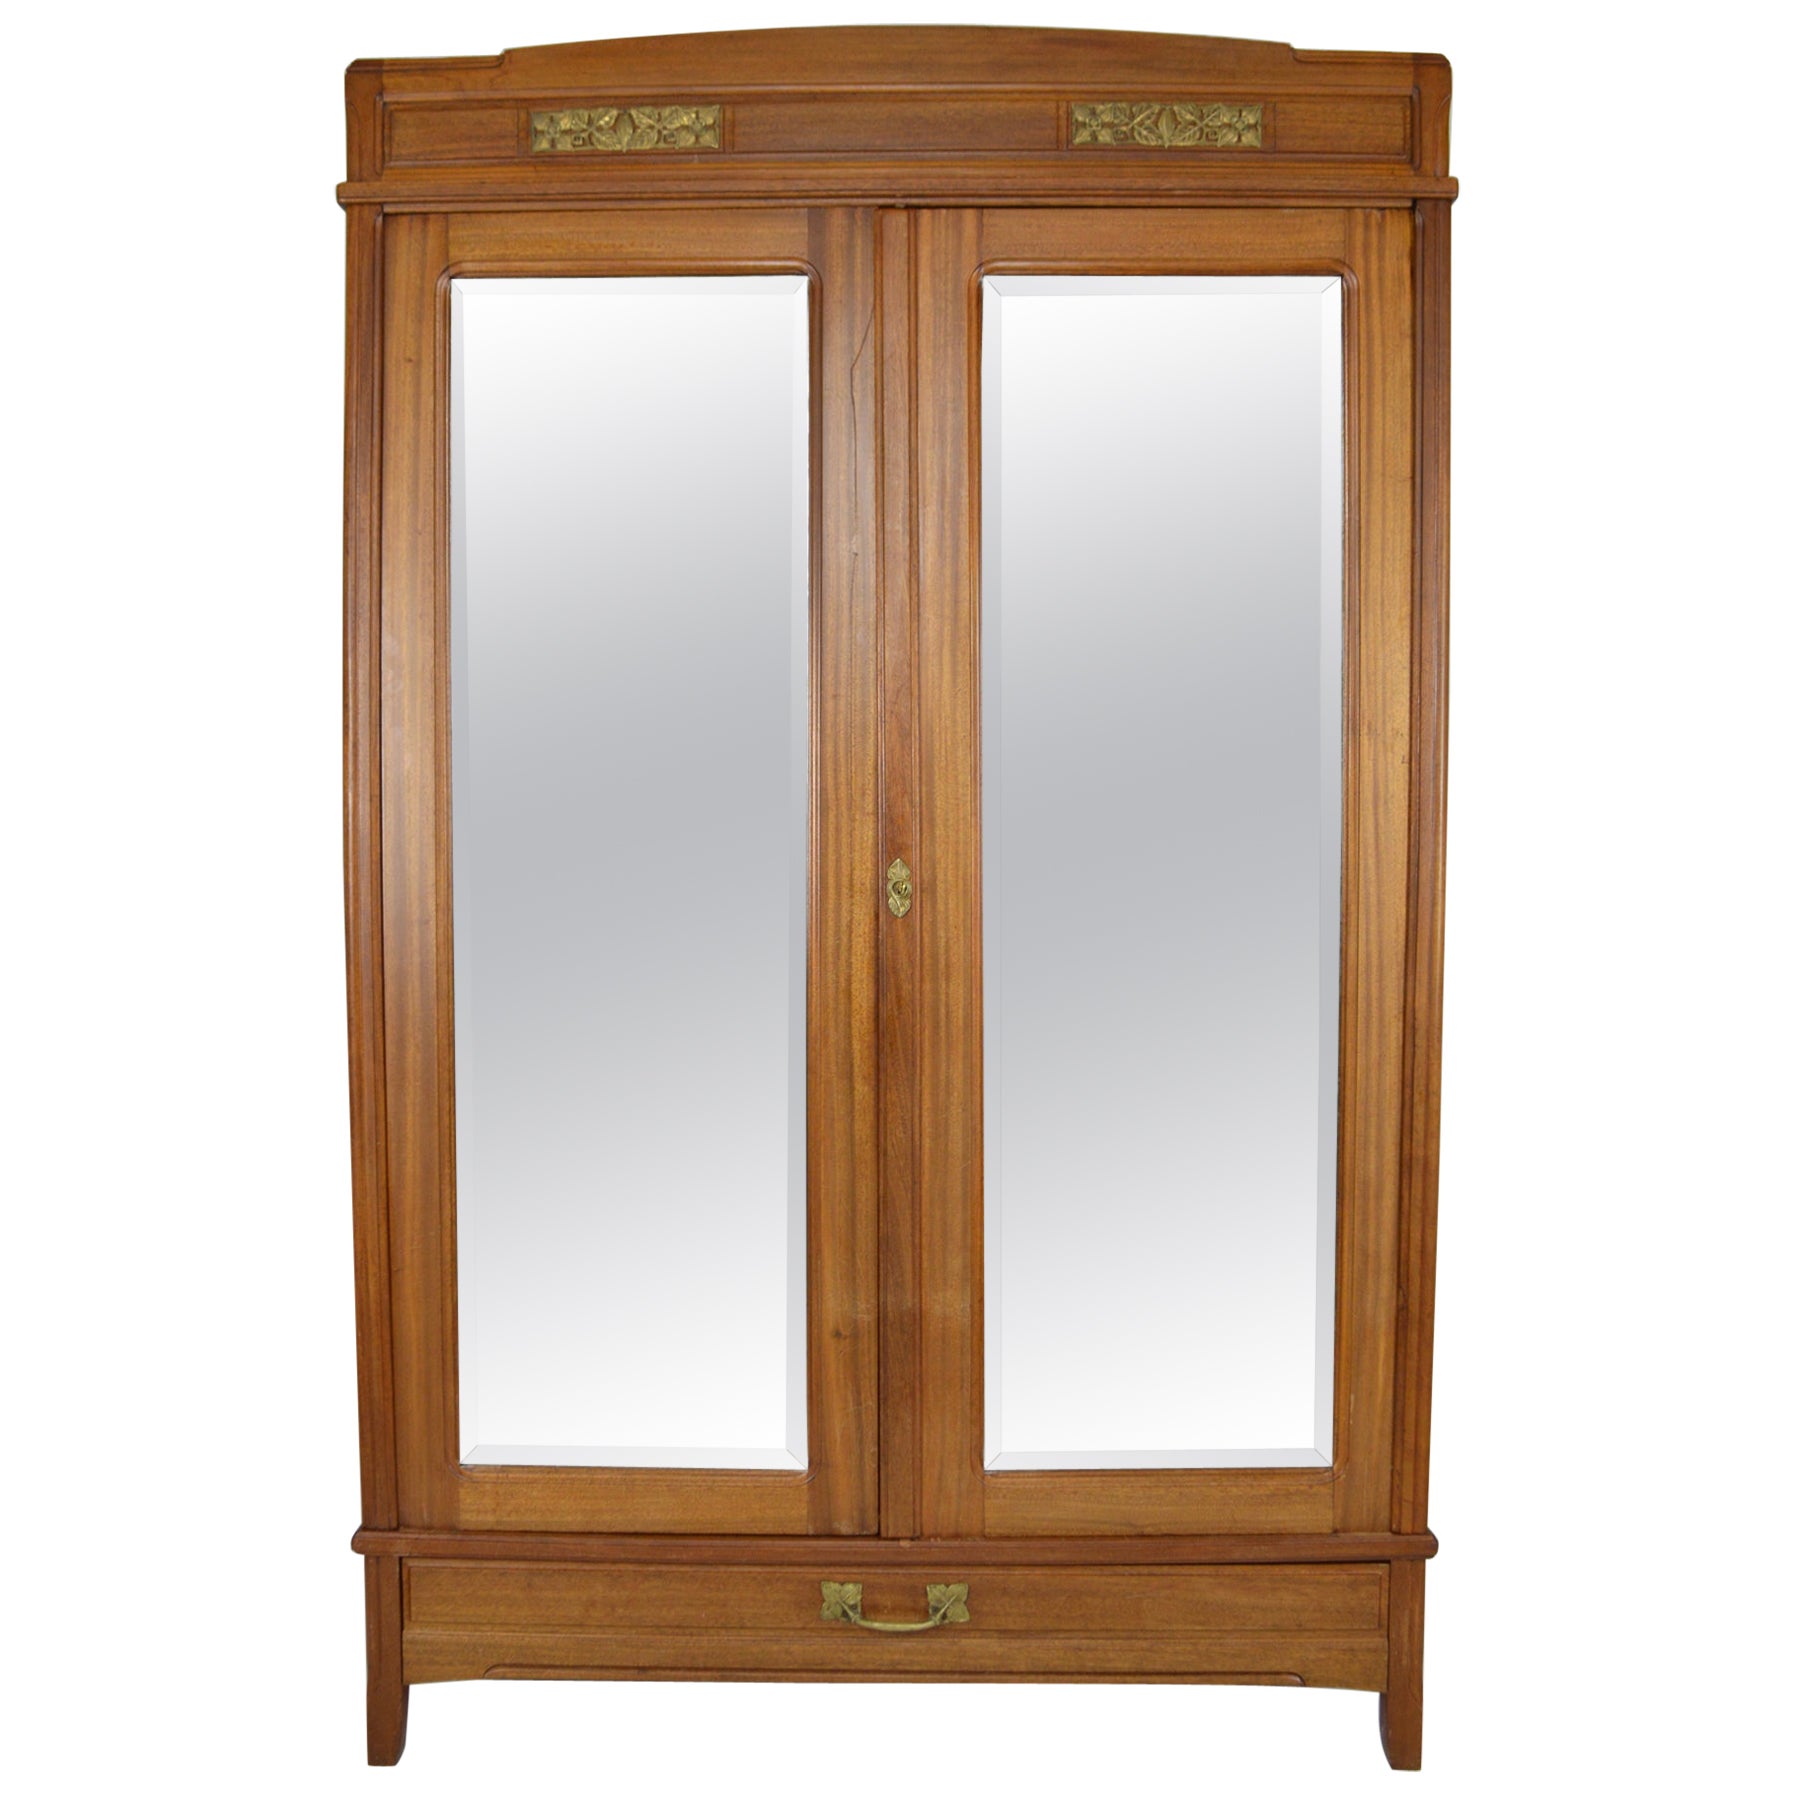 Art Nouveau Wardrobe by Mathieu Gallerey in Mahogany, Clematis model, circa 1920 For Sale